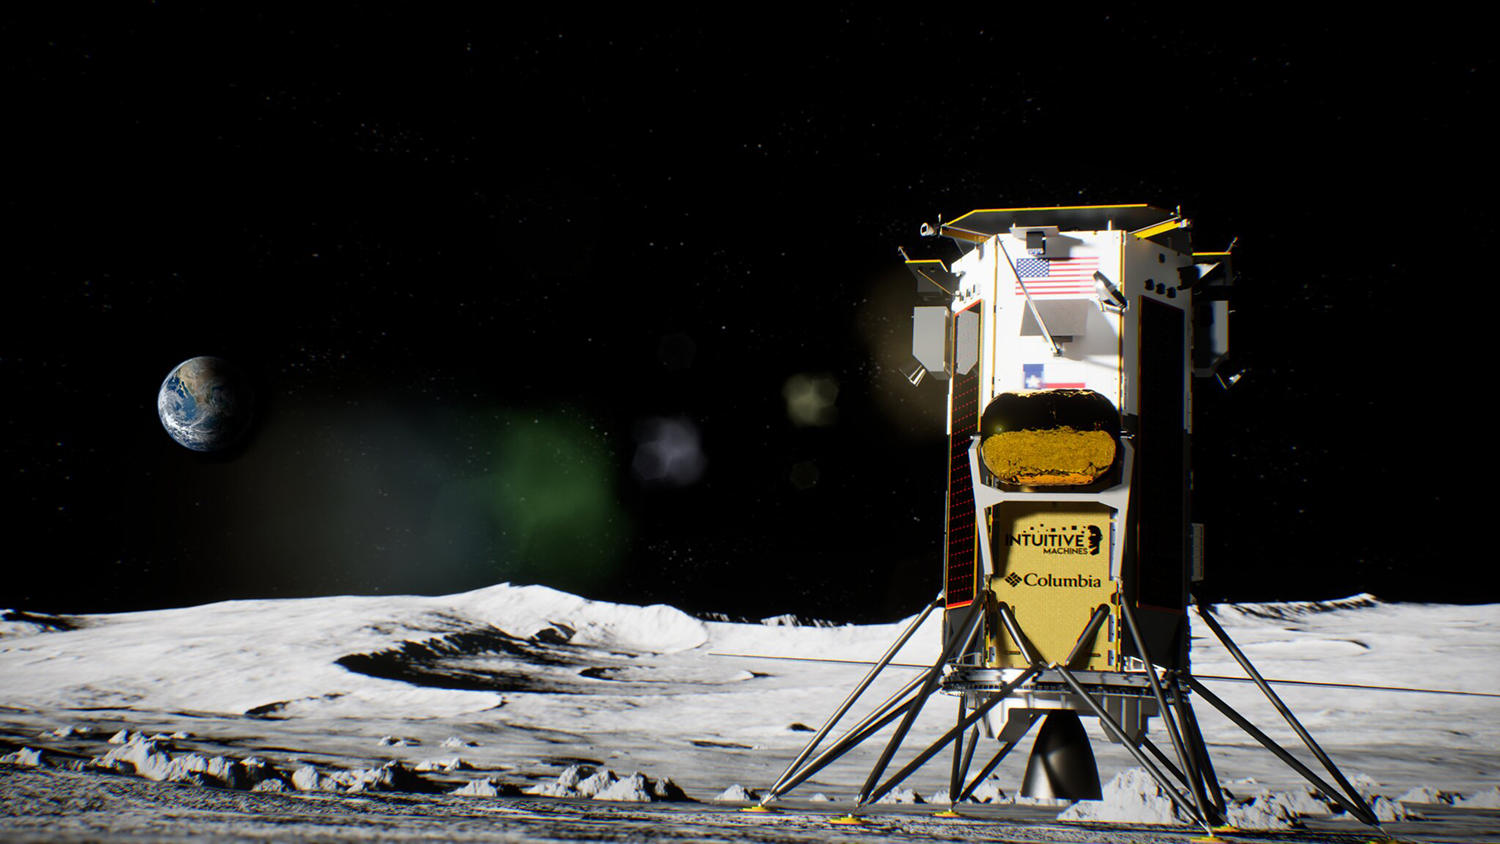 private-sector lander launched on historic moon mission